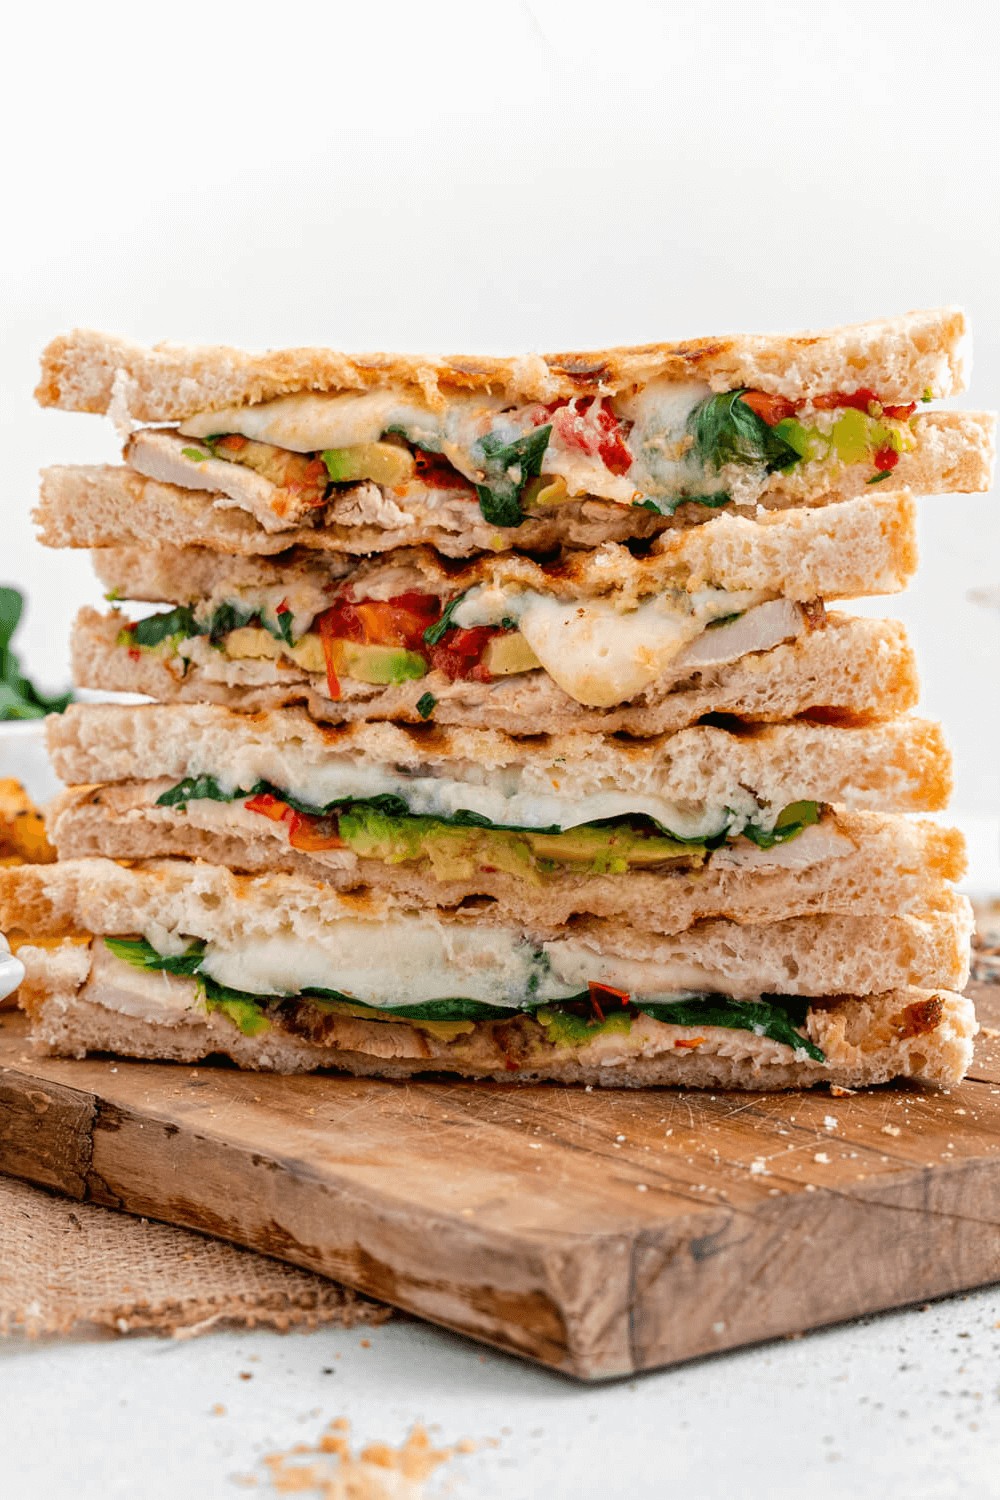 Slices of Chicken and Avocado Panini